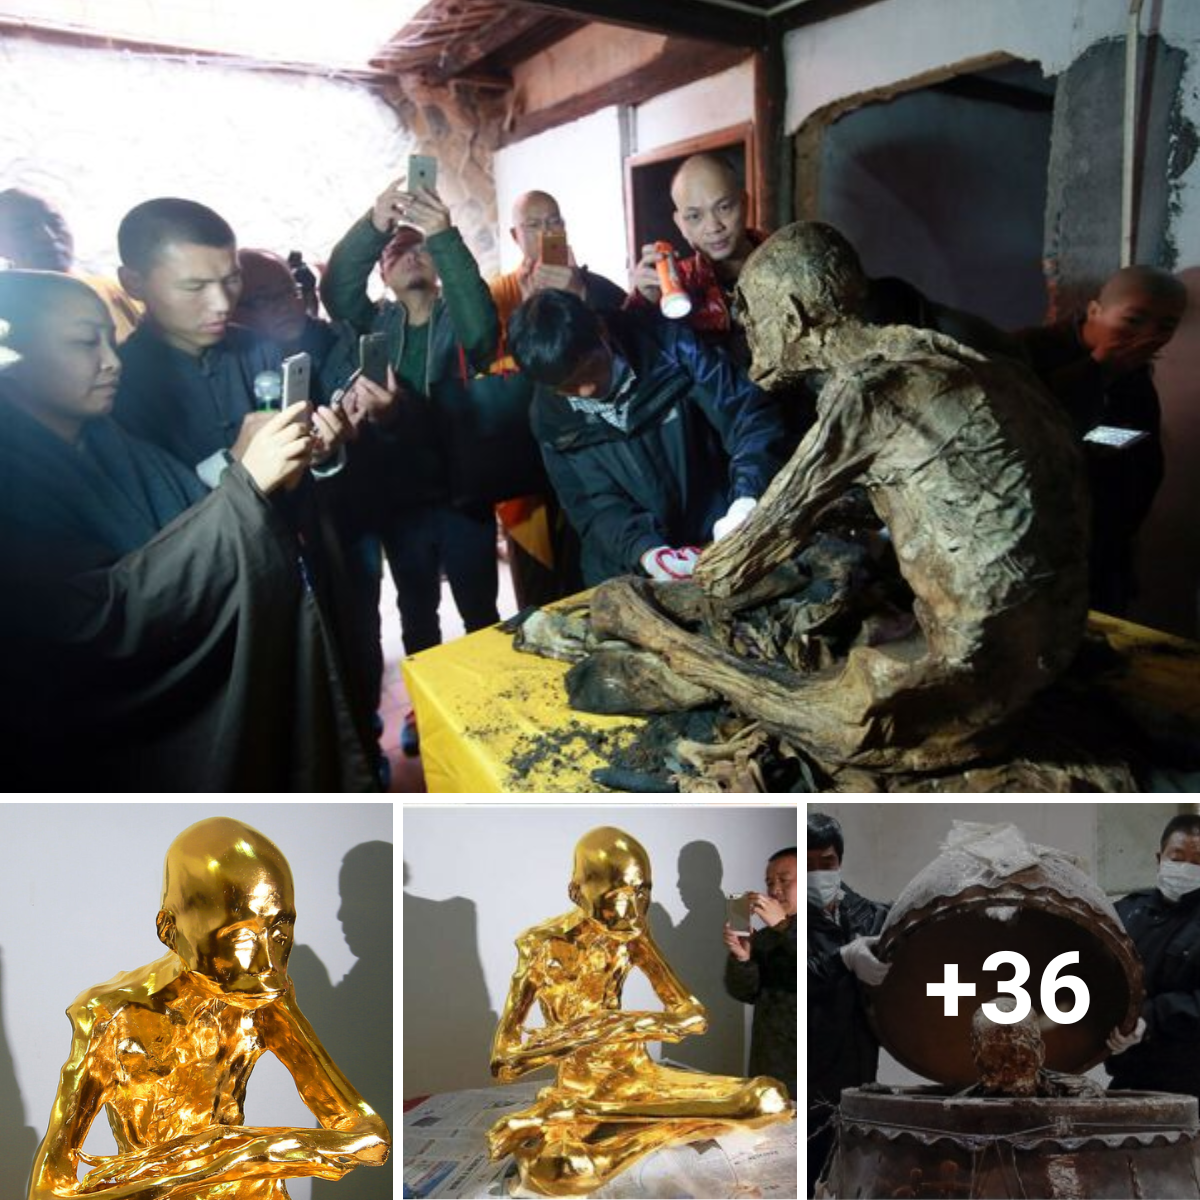 observing the magnificent custom of a respected Chinese Buddhist monk’s mummification and gold leaf wrapping. An expression of deep respect.